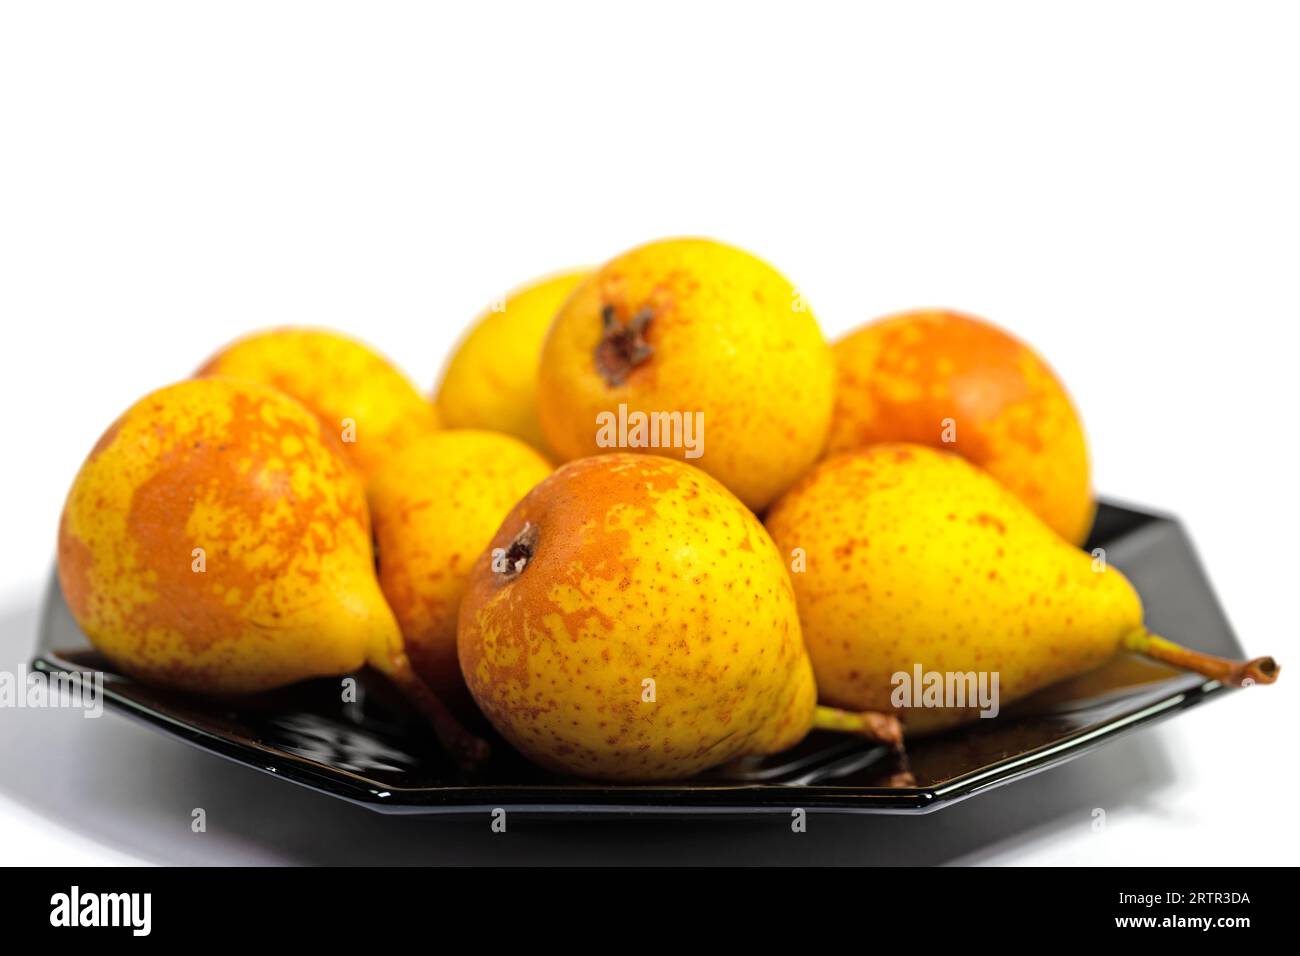 Ripe pears on a black plate against a white background Stock Photo